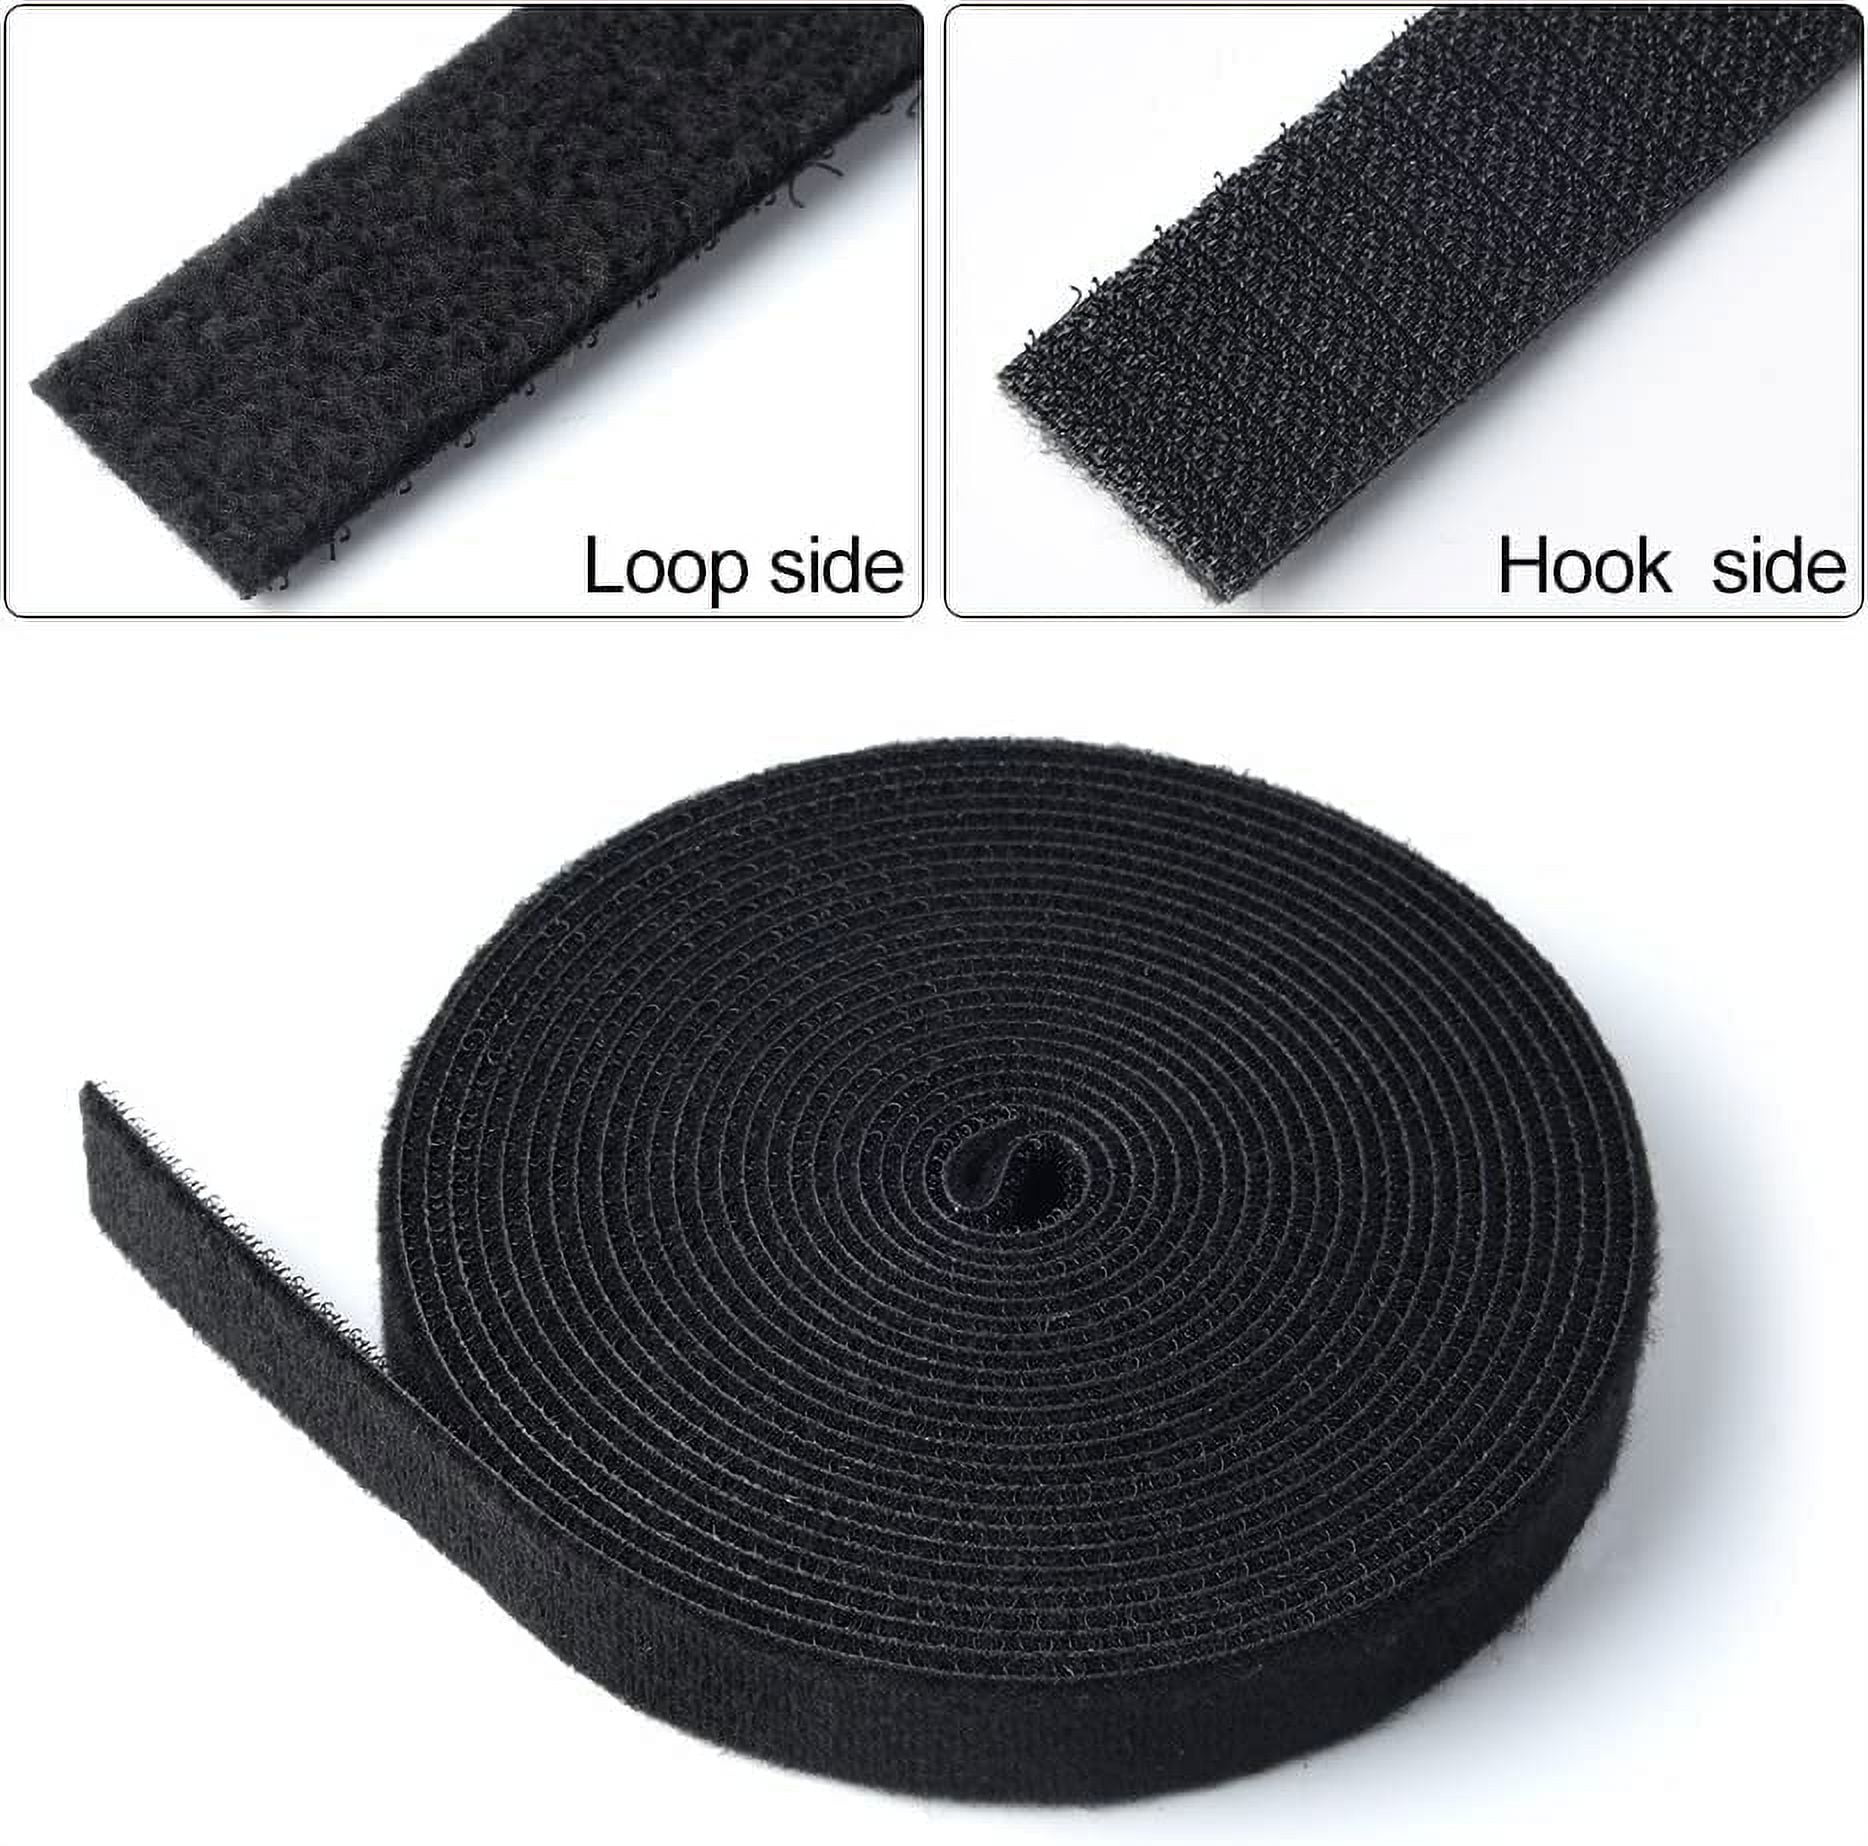 Hubbell Velcro ONE-WRAP cable ties reel - HVFBK5875 - Cable Management 